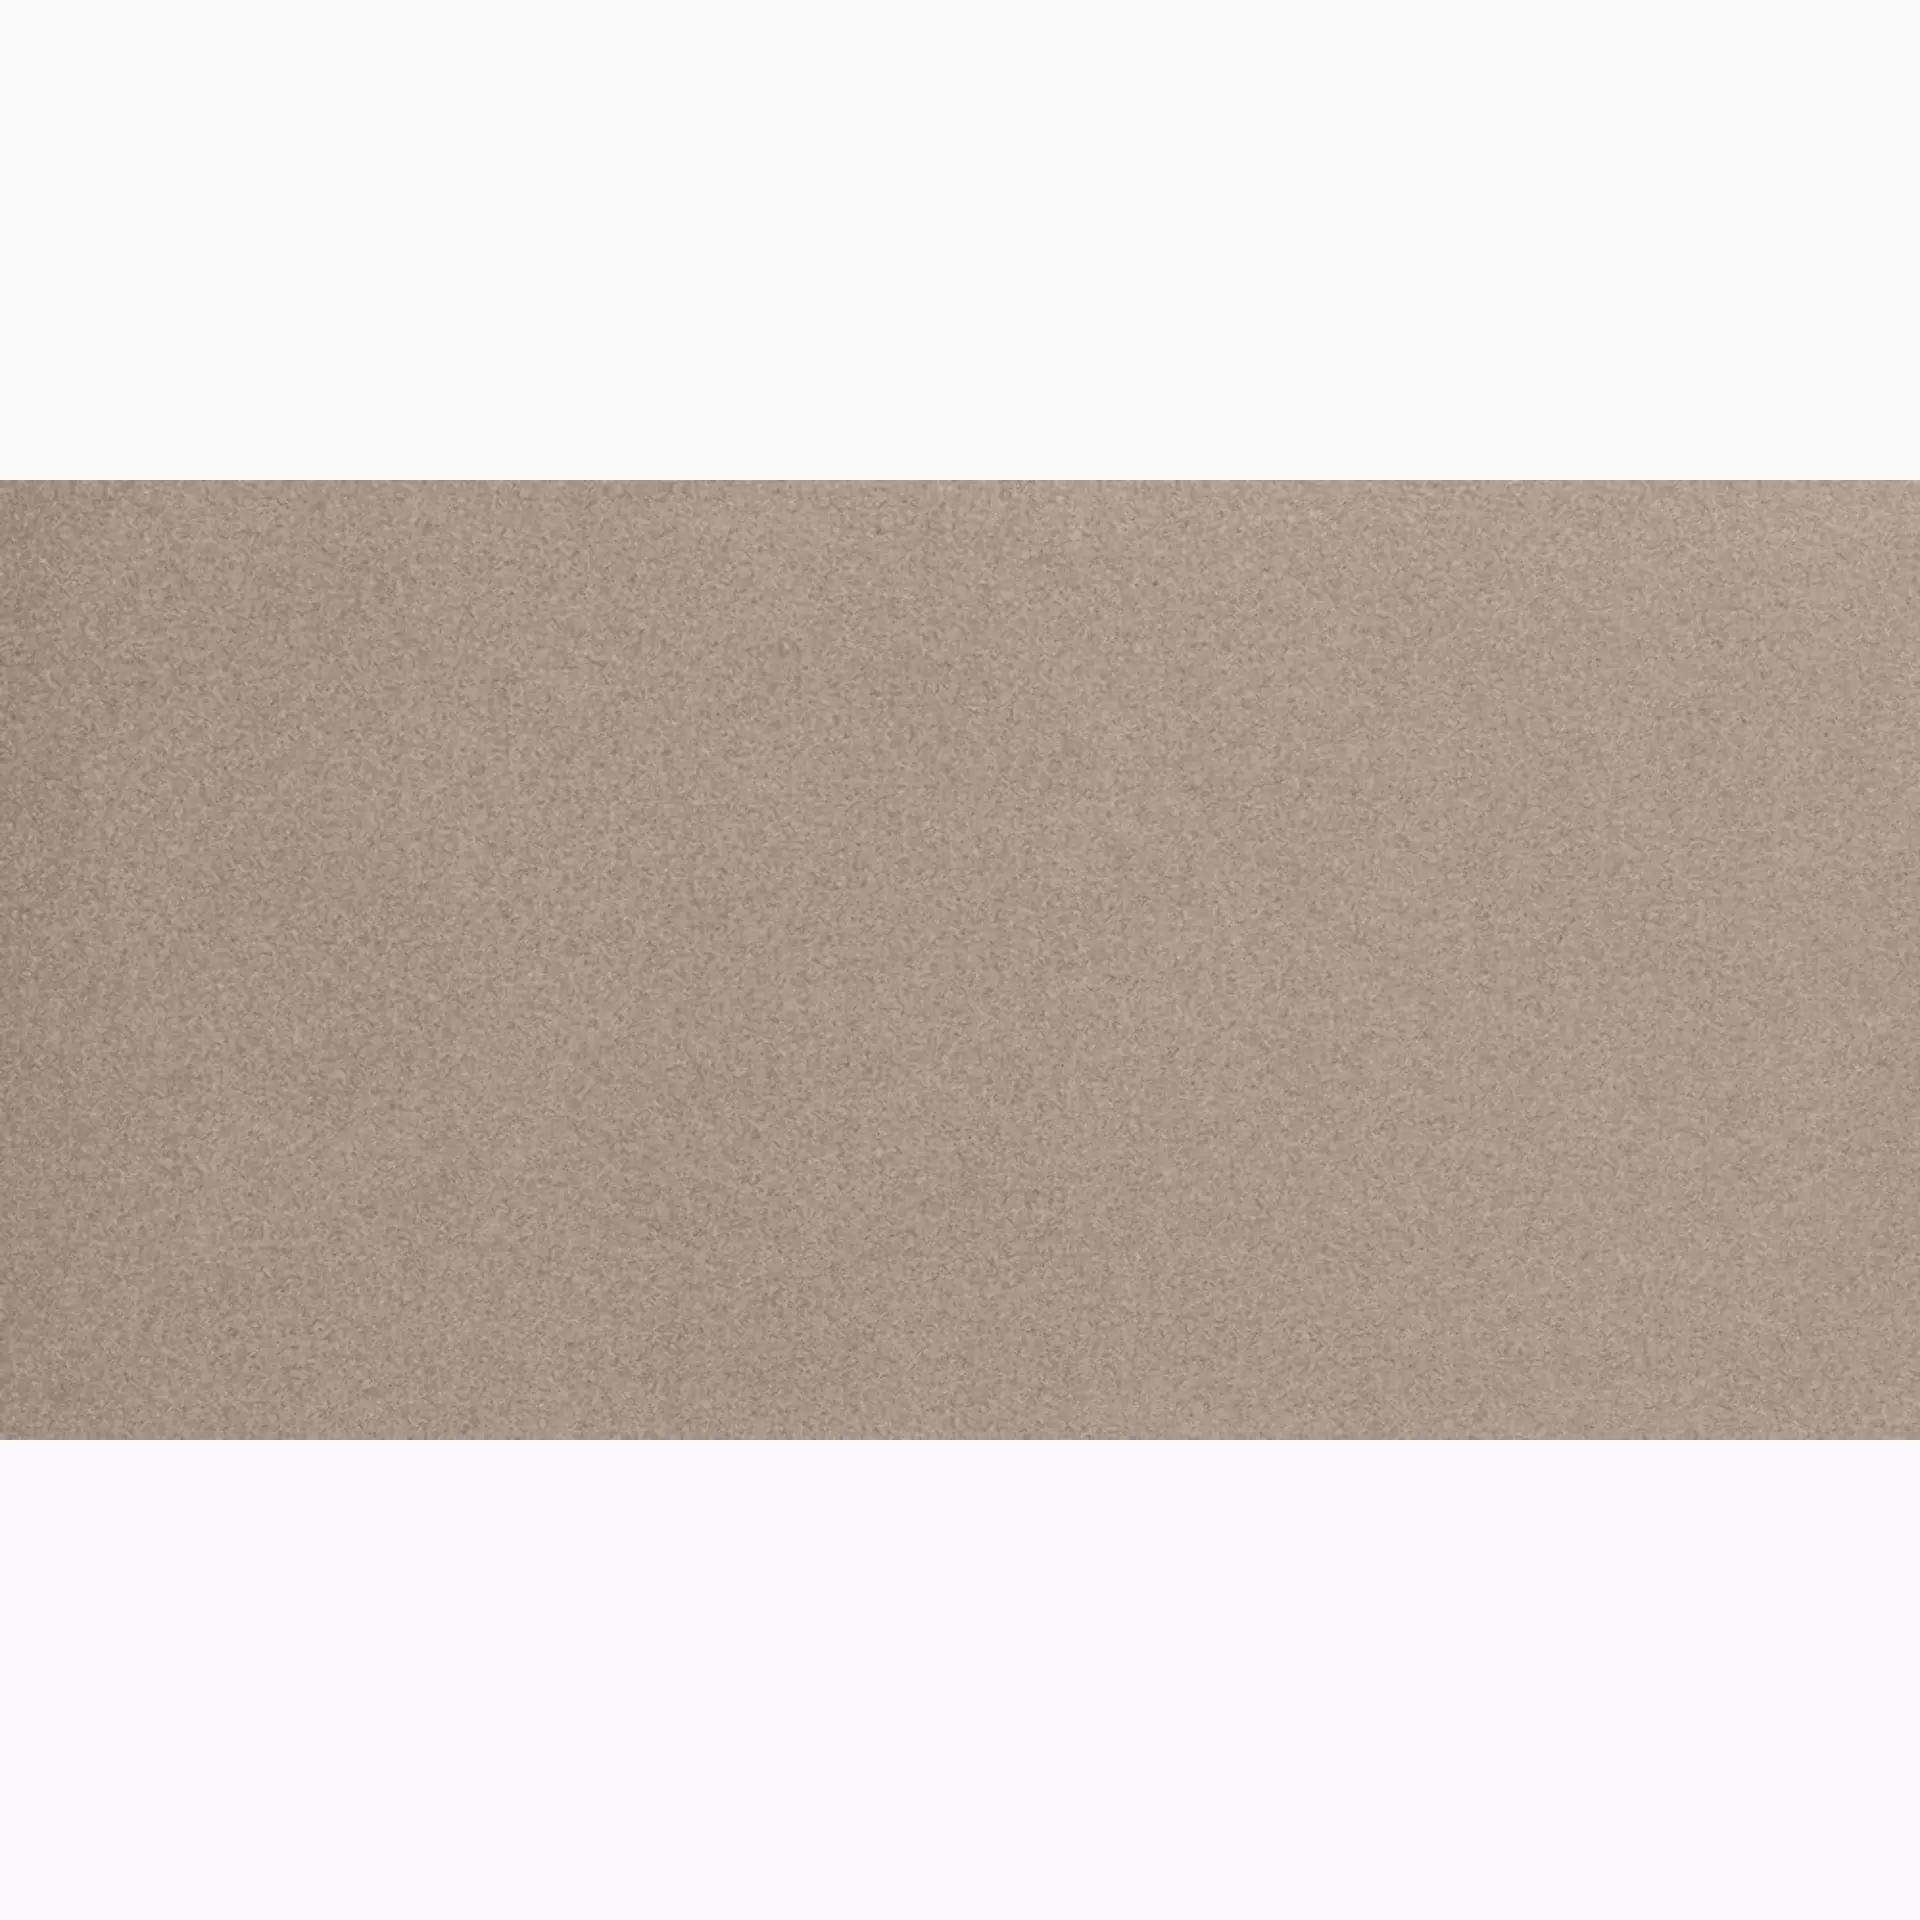 Coem Silverstone Greige Liscio Naturale 0SS622R 60x120cm rectified 10mm